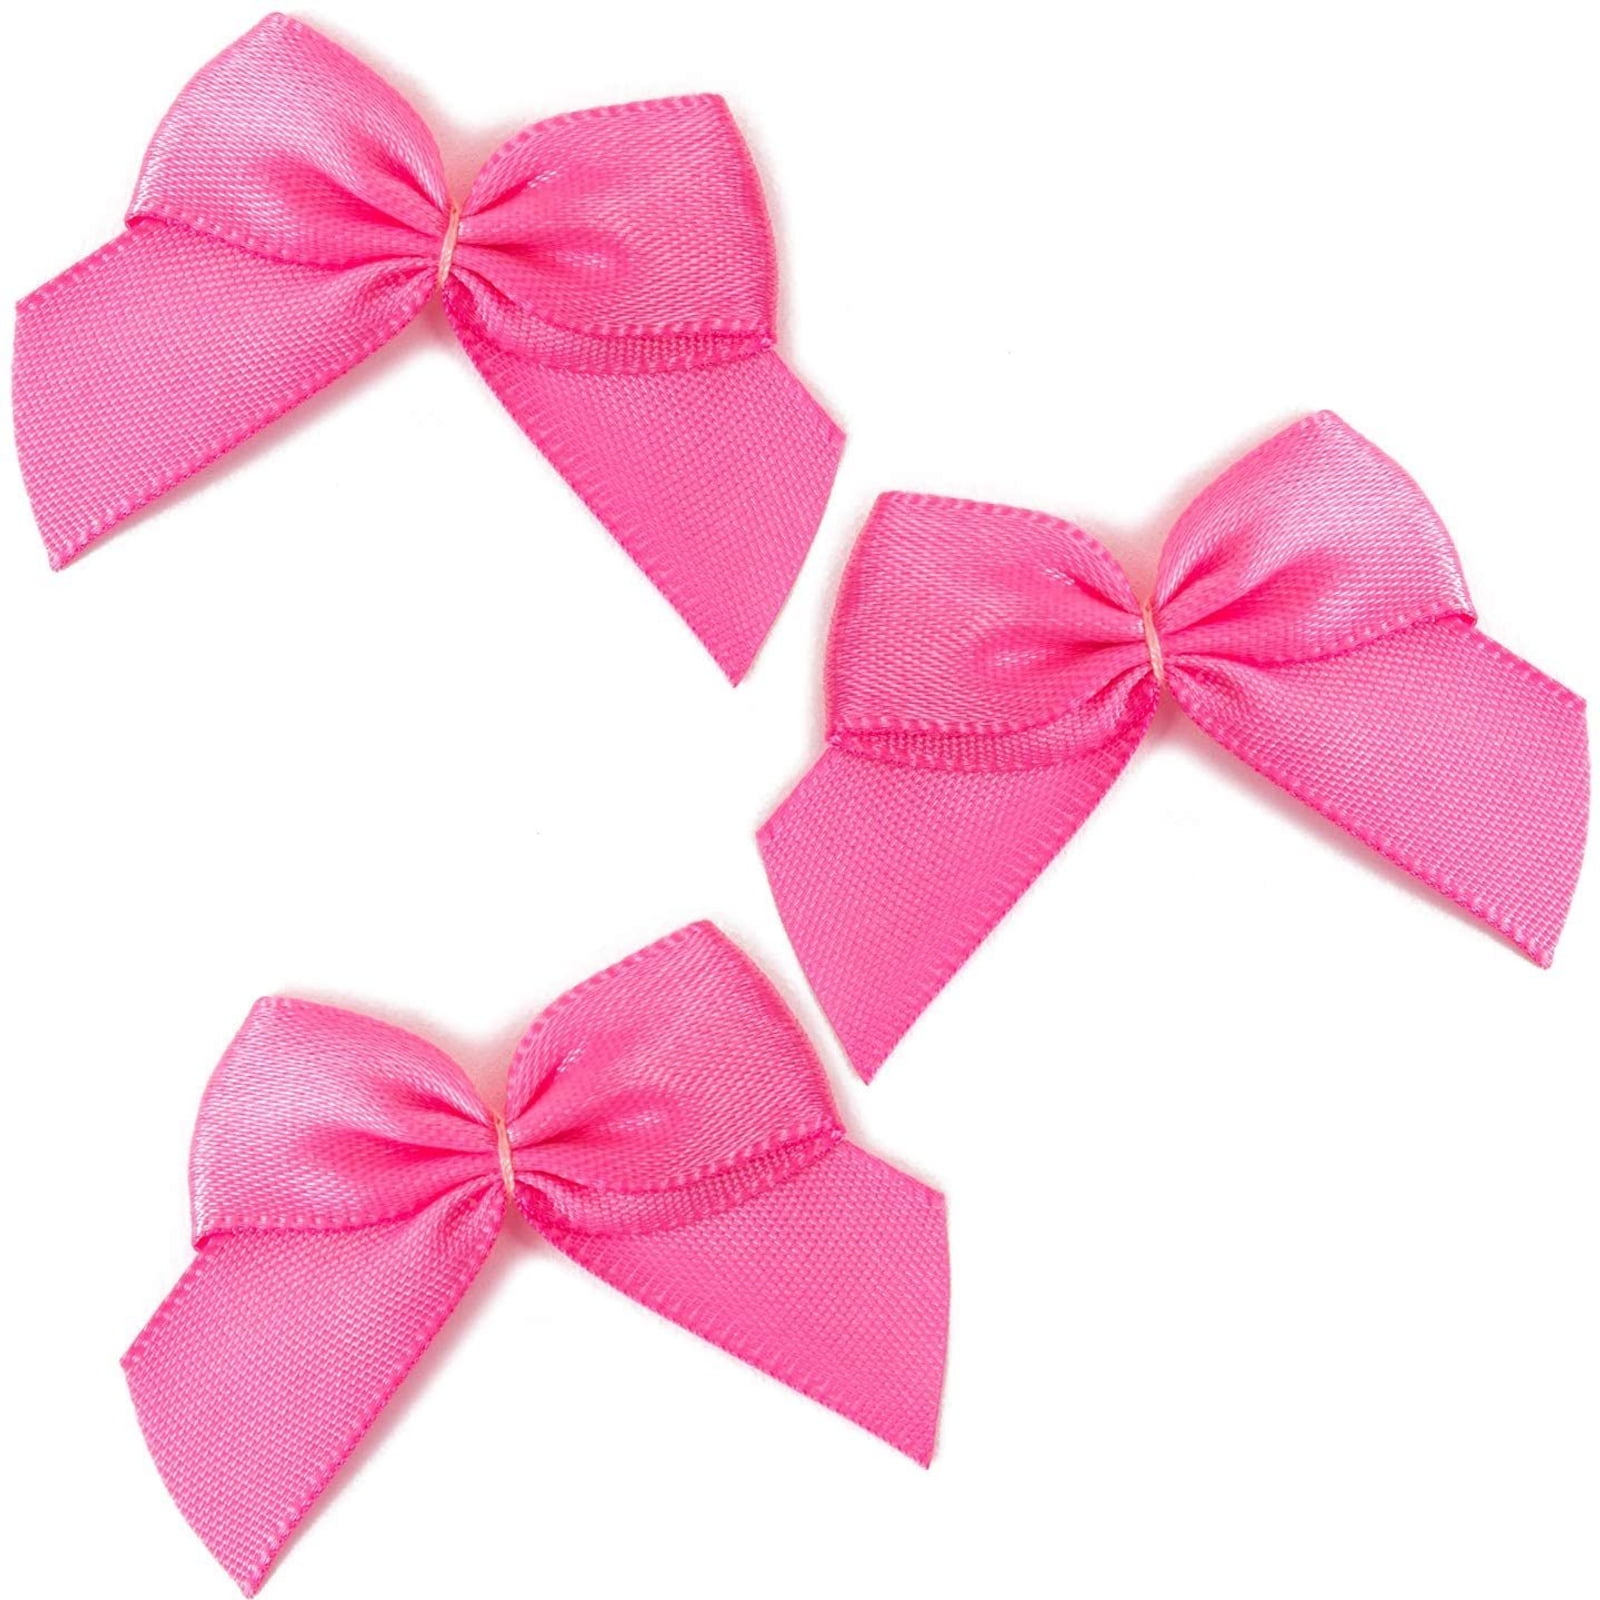 5cm Satin Bows Antique Pink Self Adhesive Pre Tied 16mm Ribbon Pack 12 FREE P&P 